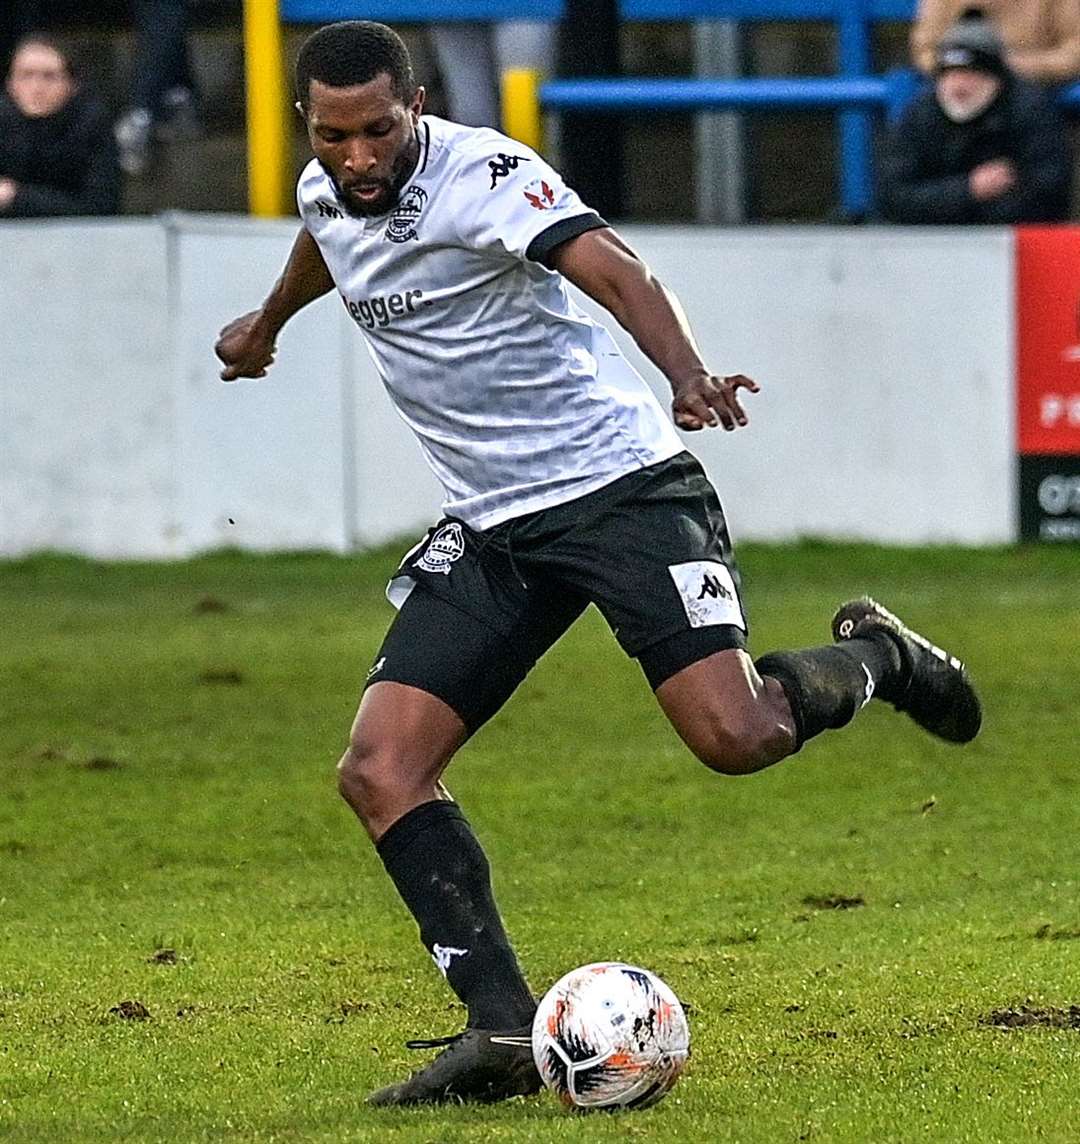 Tyrone Sterling - was sent off for Dover at St Albans in their 1-0 weekend loss, although Whites have appealed the defender's suspension. Picture: Stuart Brock